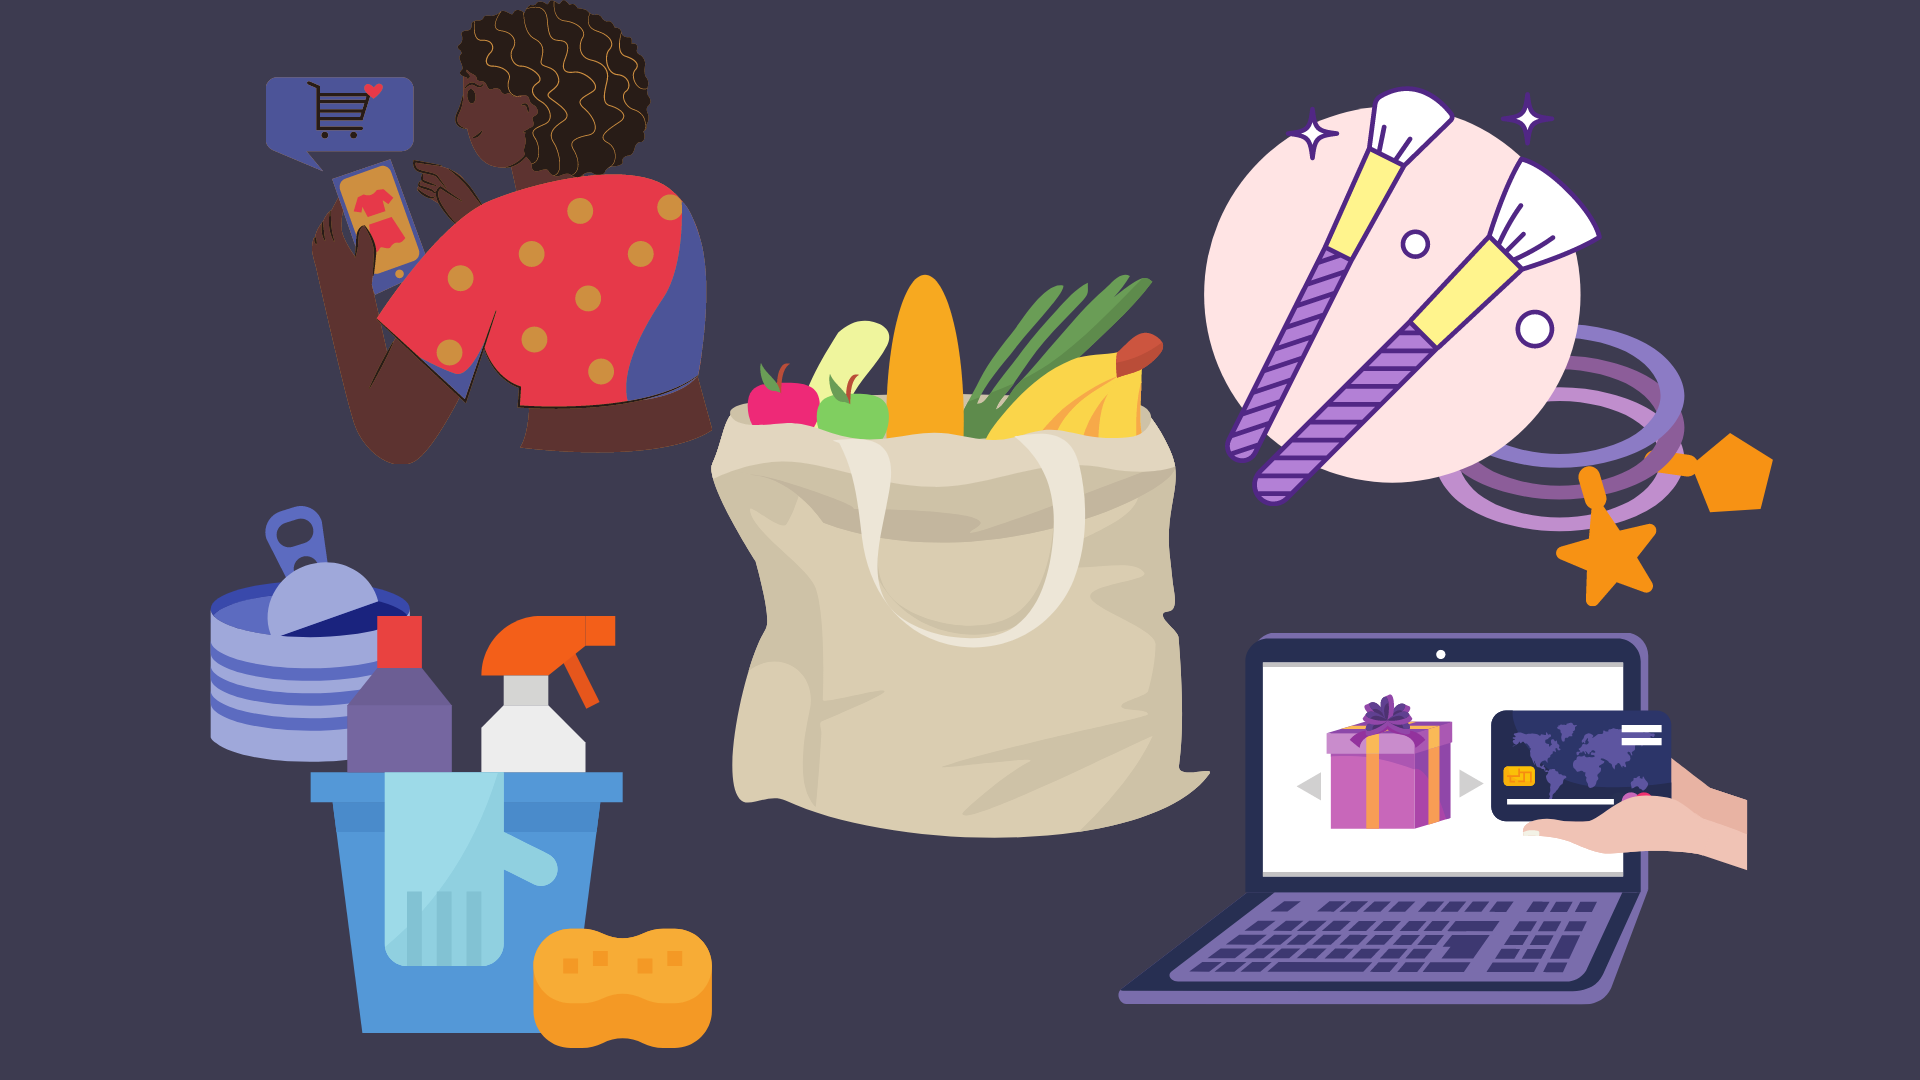 Illustration of a grocery bag, and various cartoon drawings of items such as cleaning tools, makeup, and online shopping surrounding it.